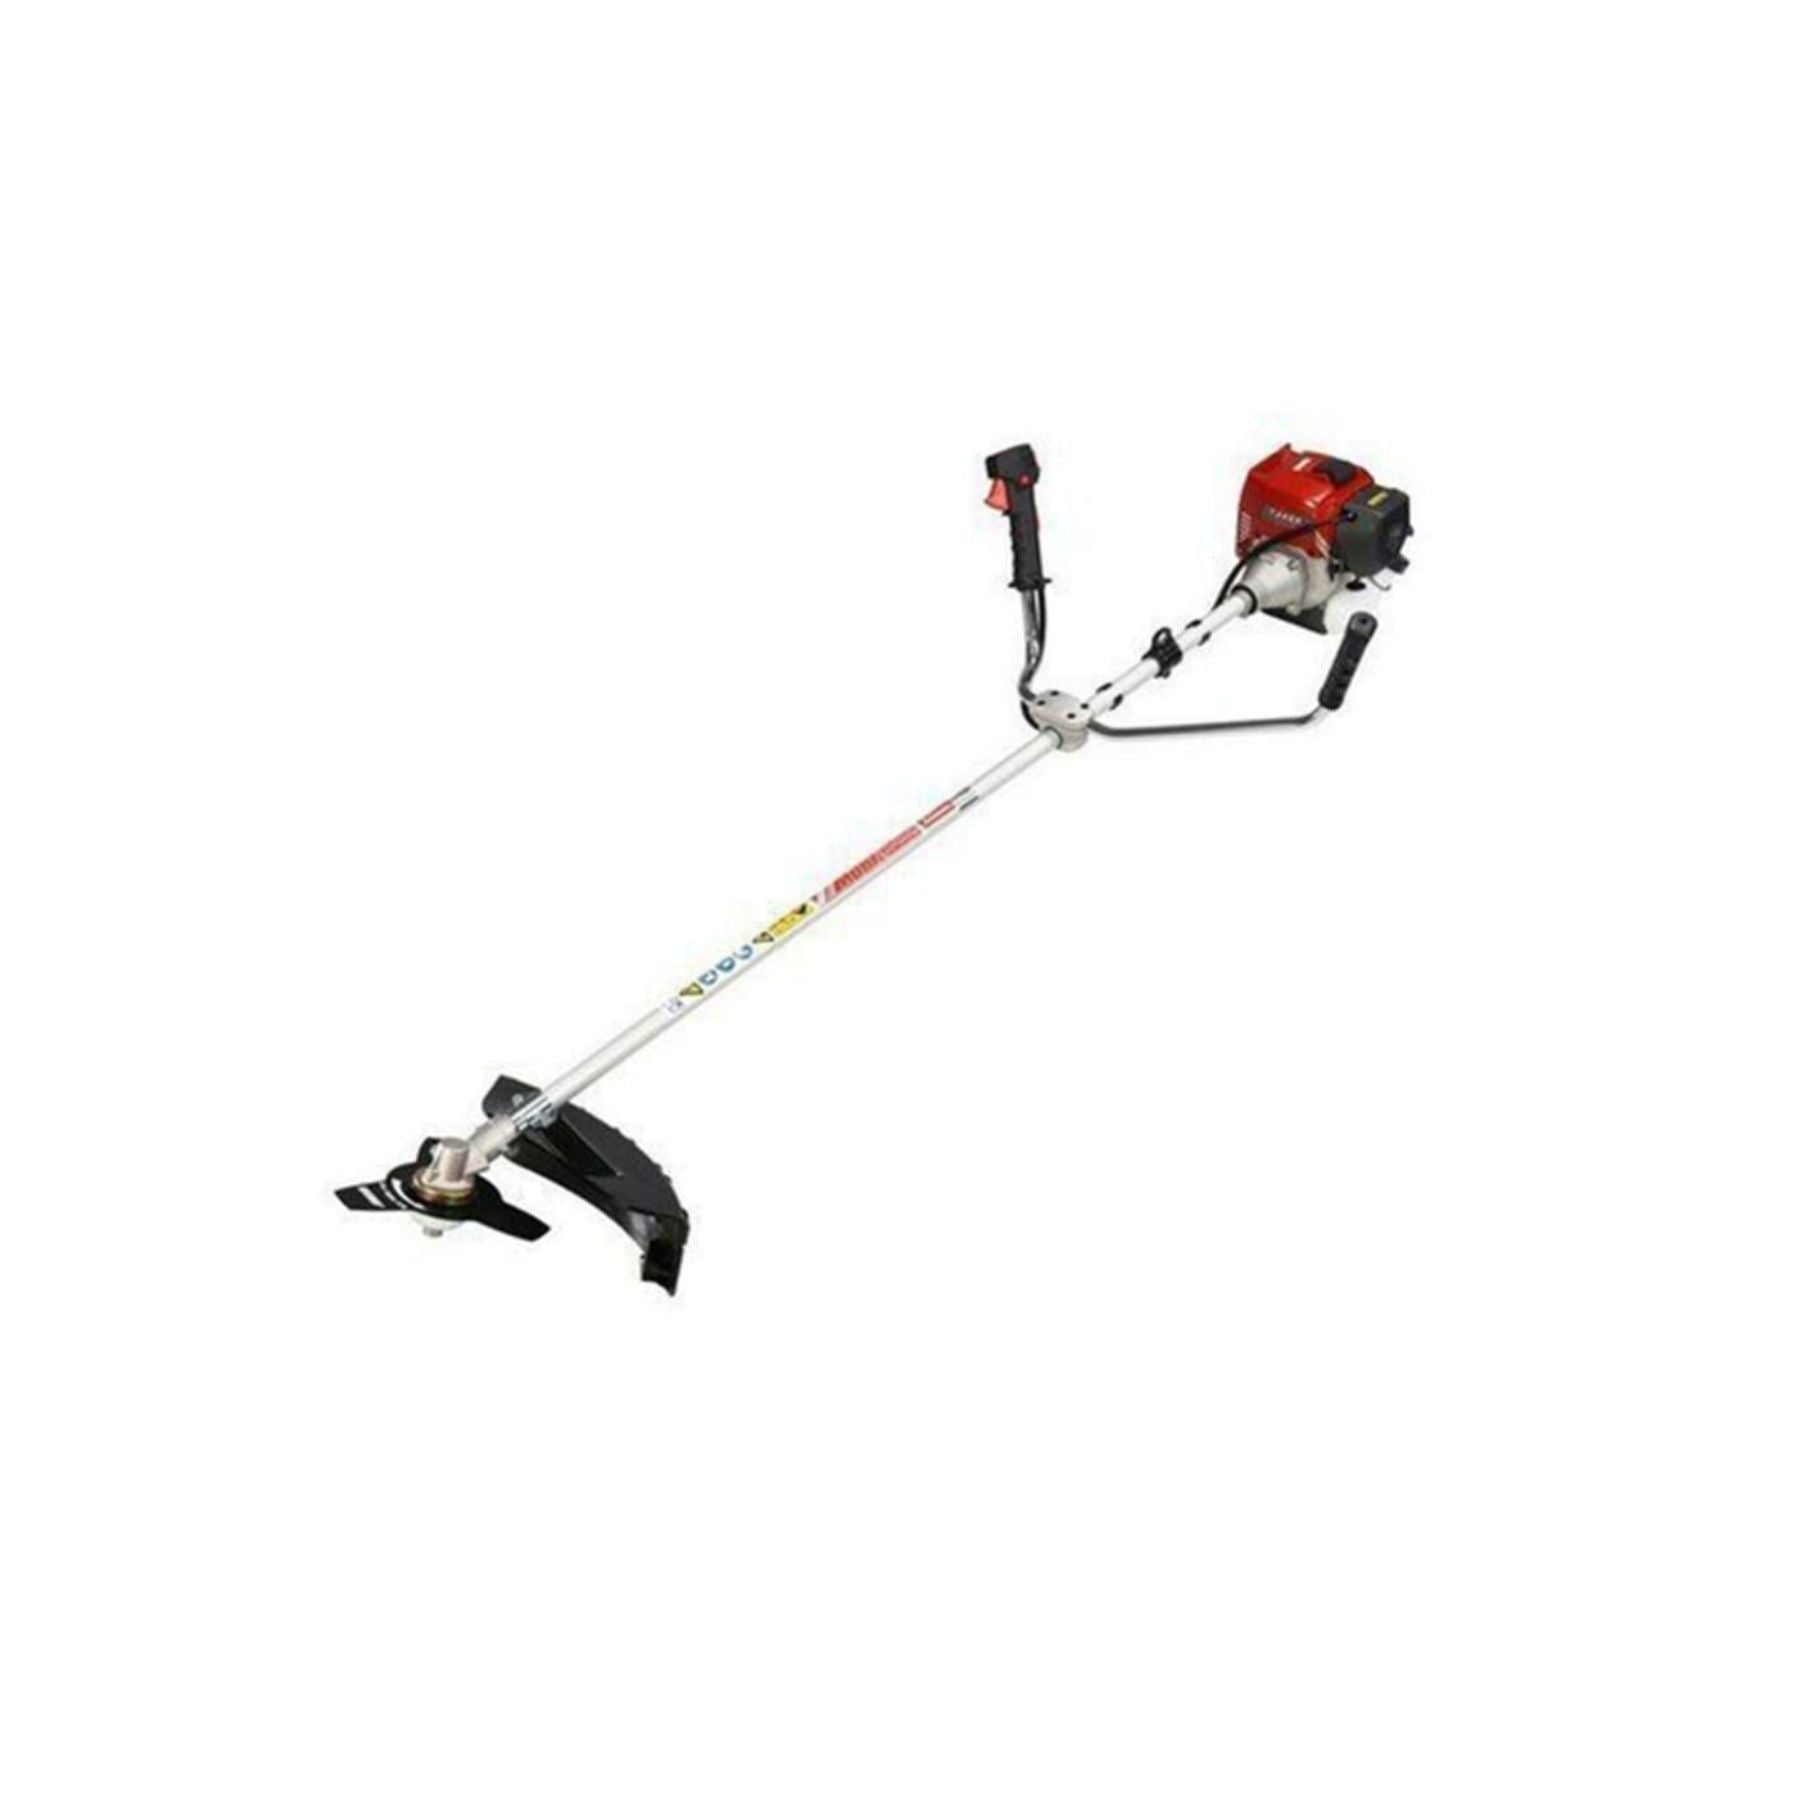 Rover Brush Cutter (Straight Shaft) RS 943 Pro 41AJ943S338